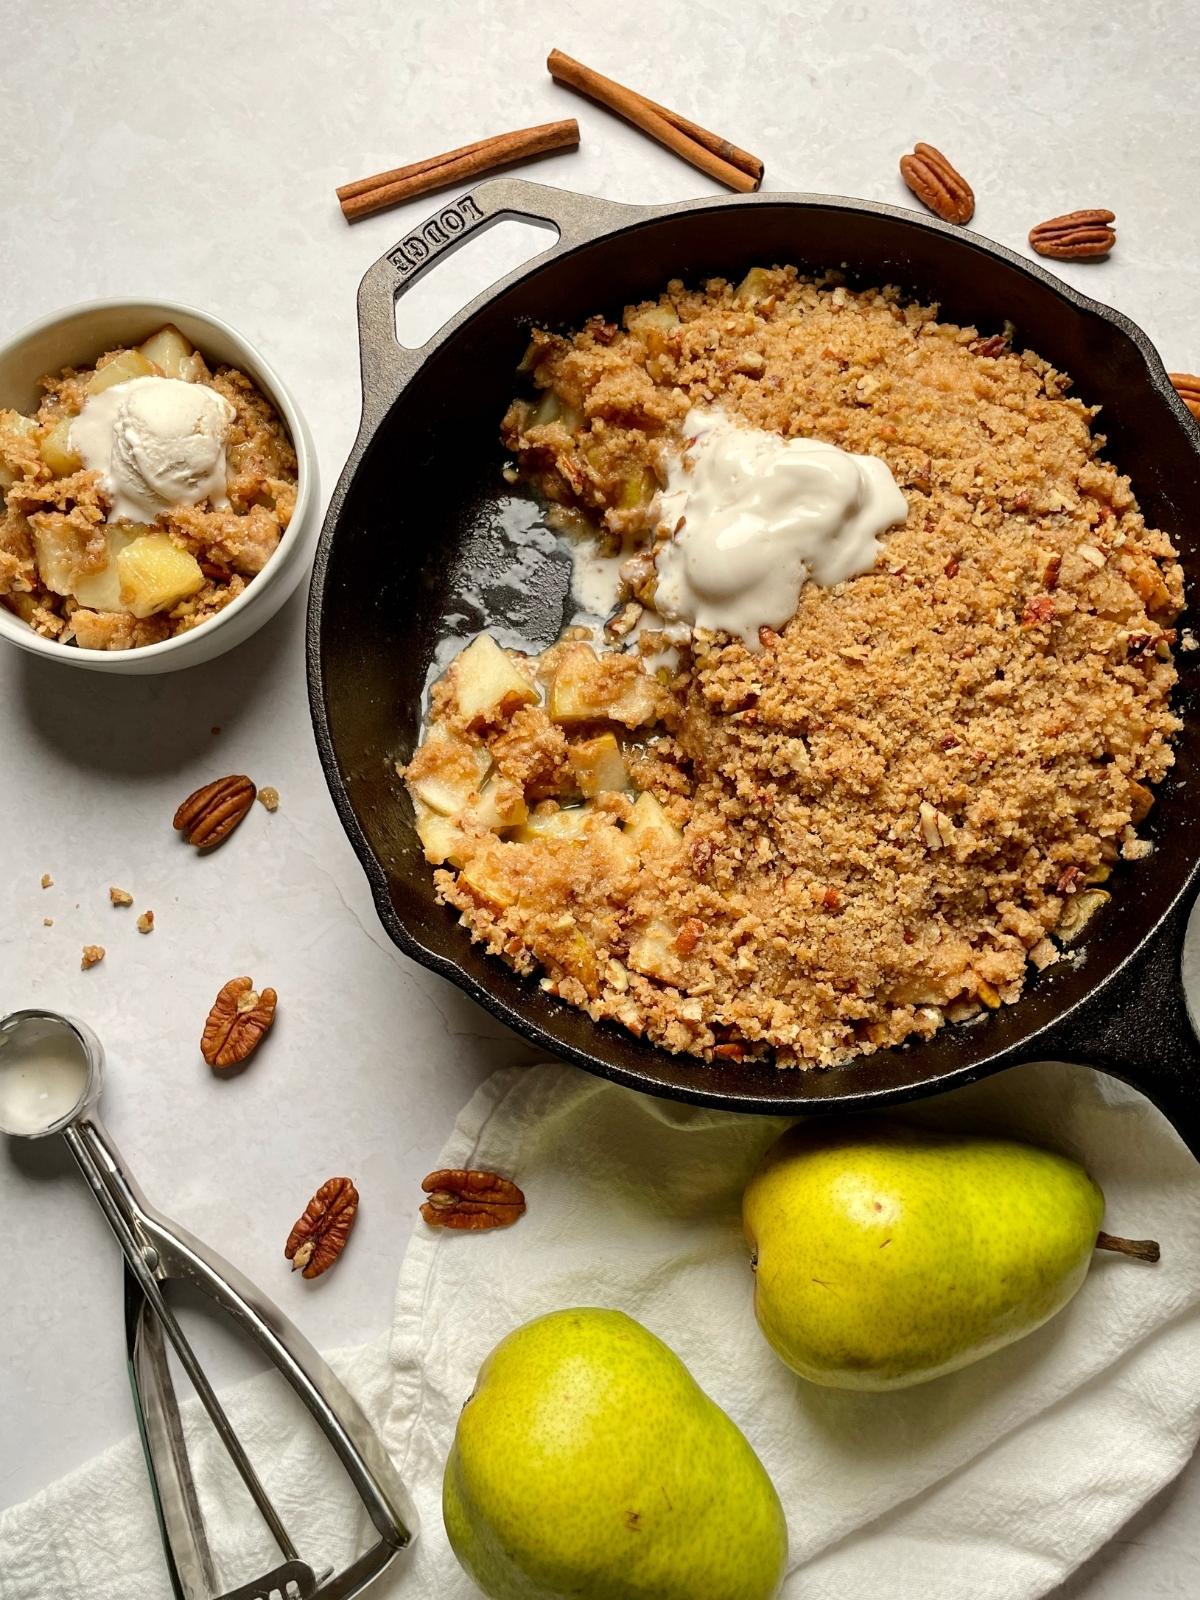 Serving pear crumble into a bowl.